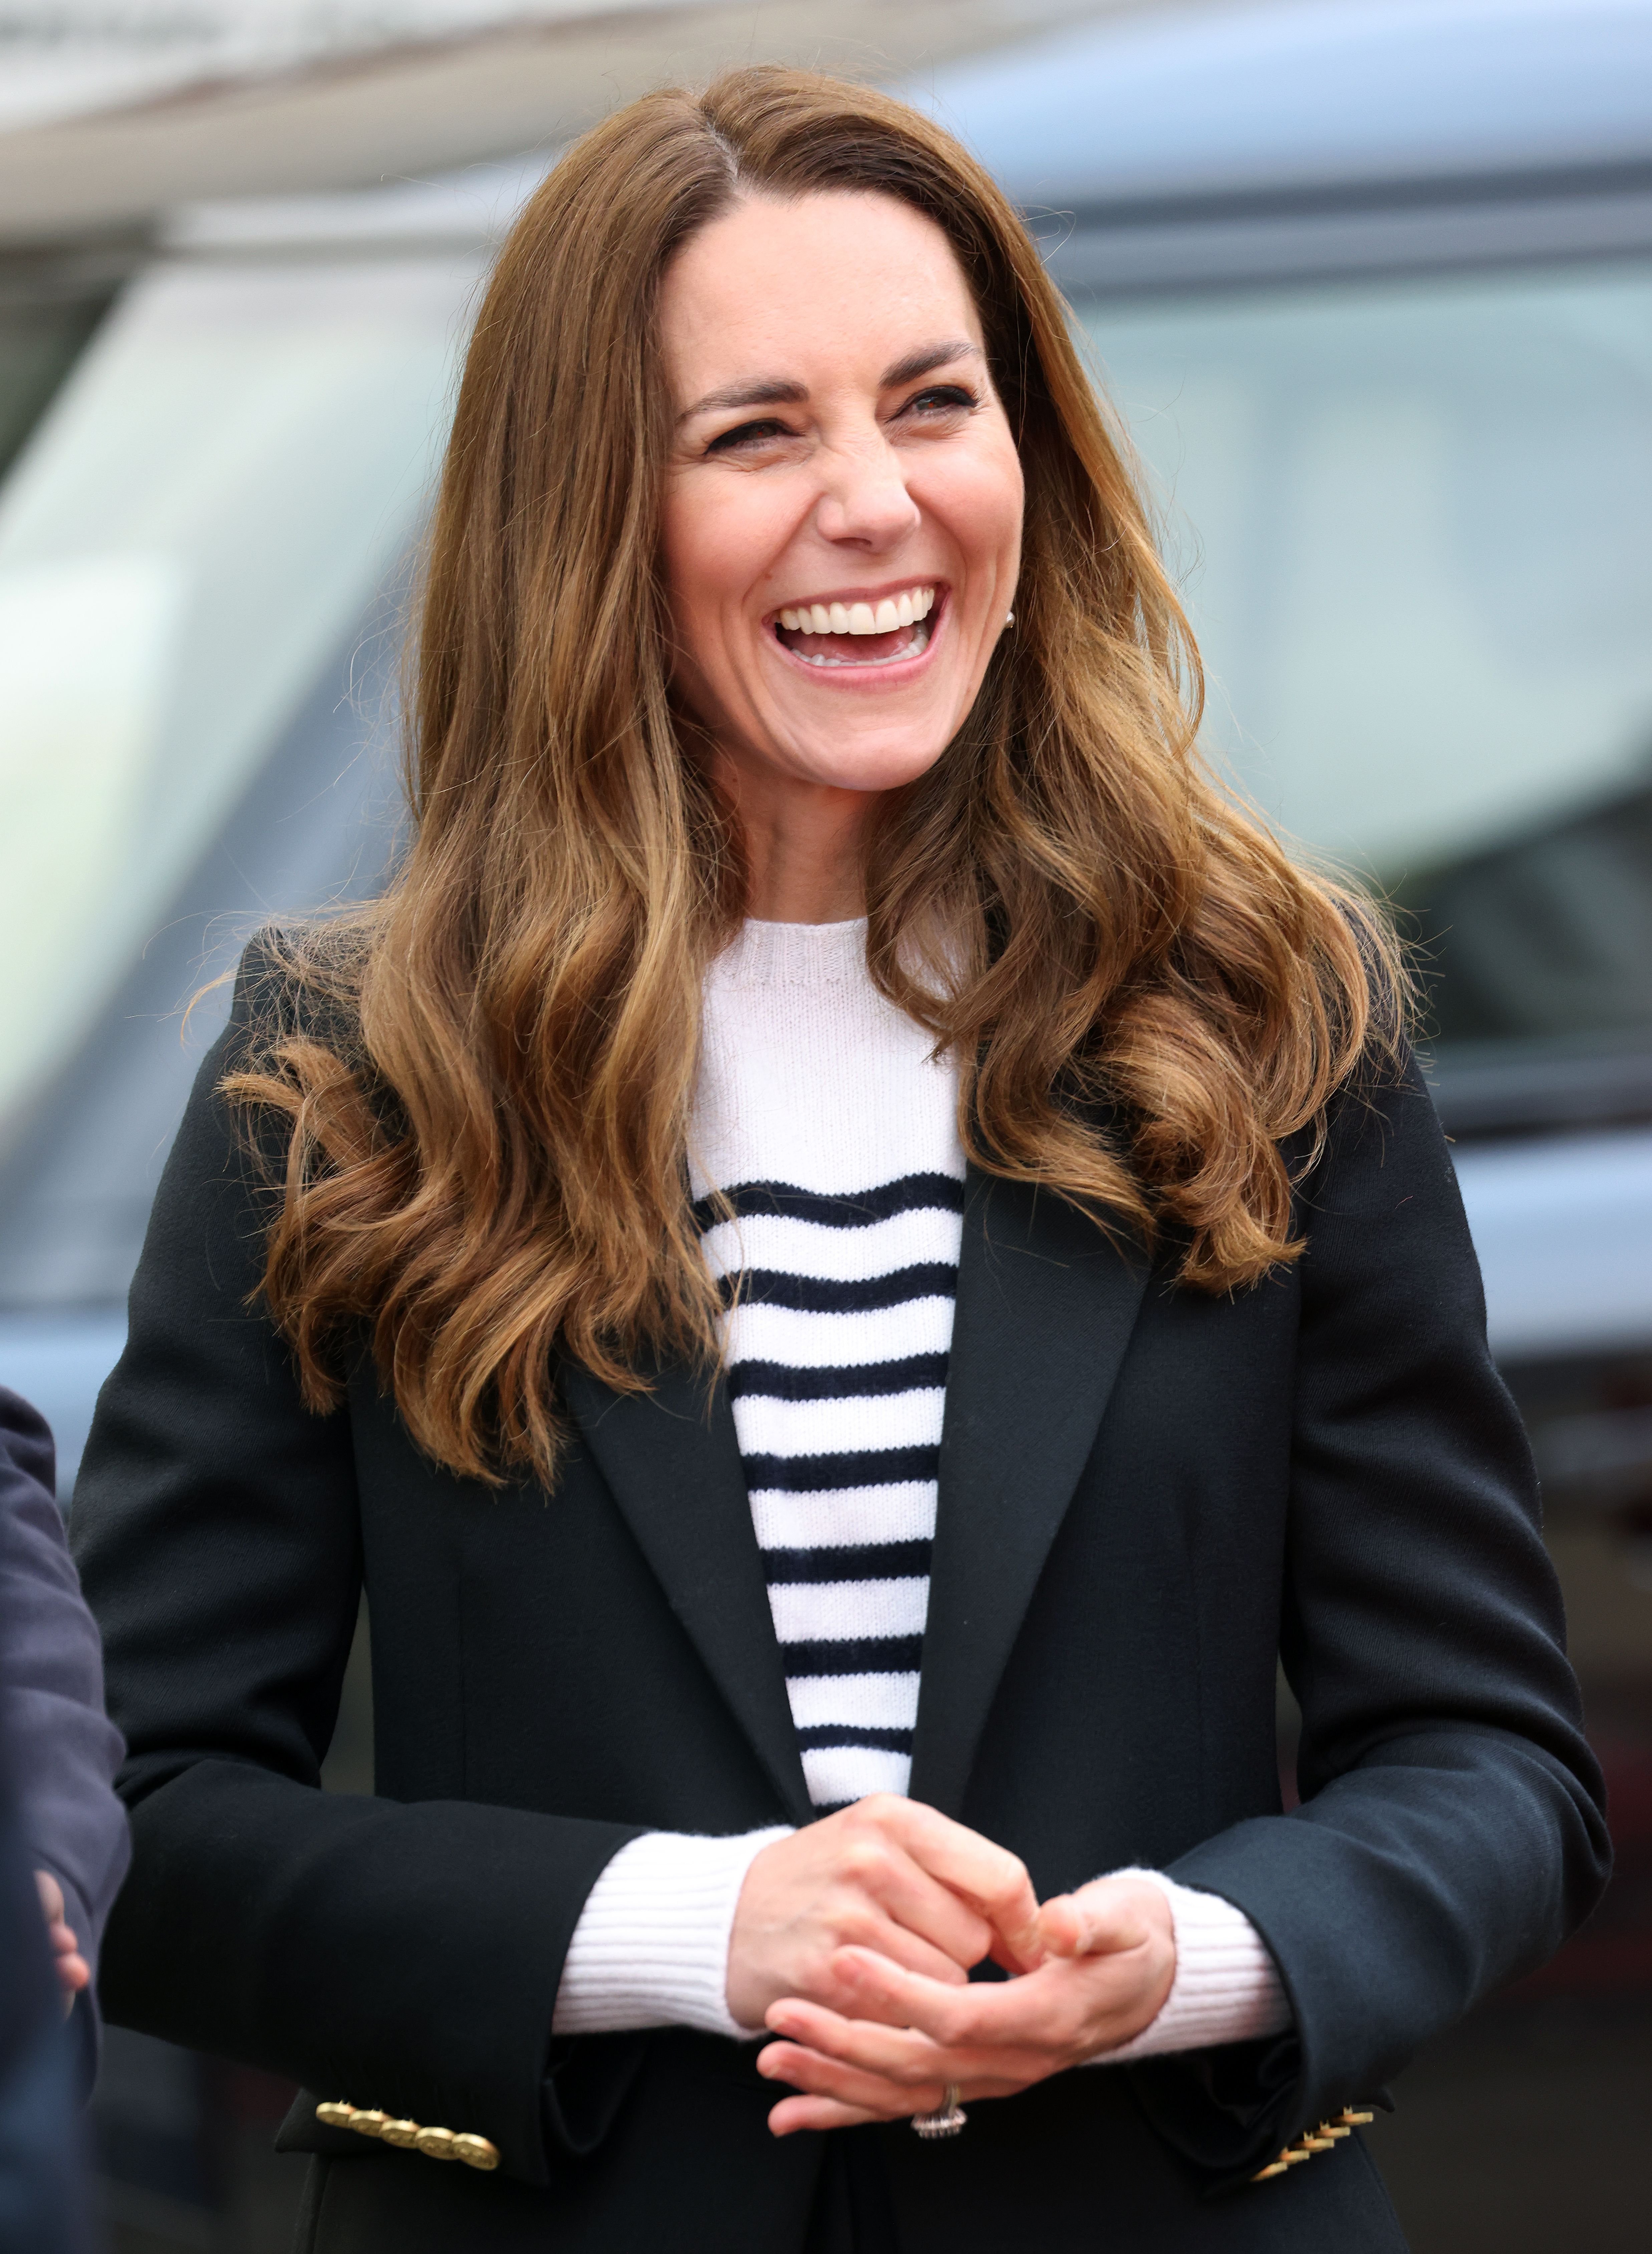 Catherine, Duchess of Cambridge smiles as she meets local fishermen and their families to hear about the work of fishing communities in the village of Pittennweem with Prince William, Duke of Cambridge on day six of their week-long visit to Scotland on May 26, 2021 | Getty Images